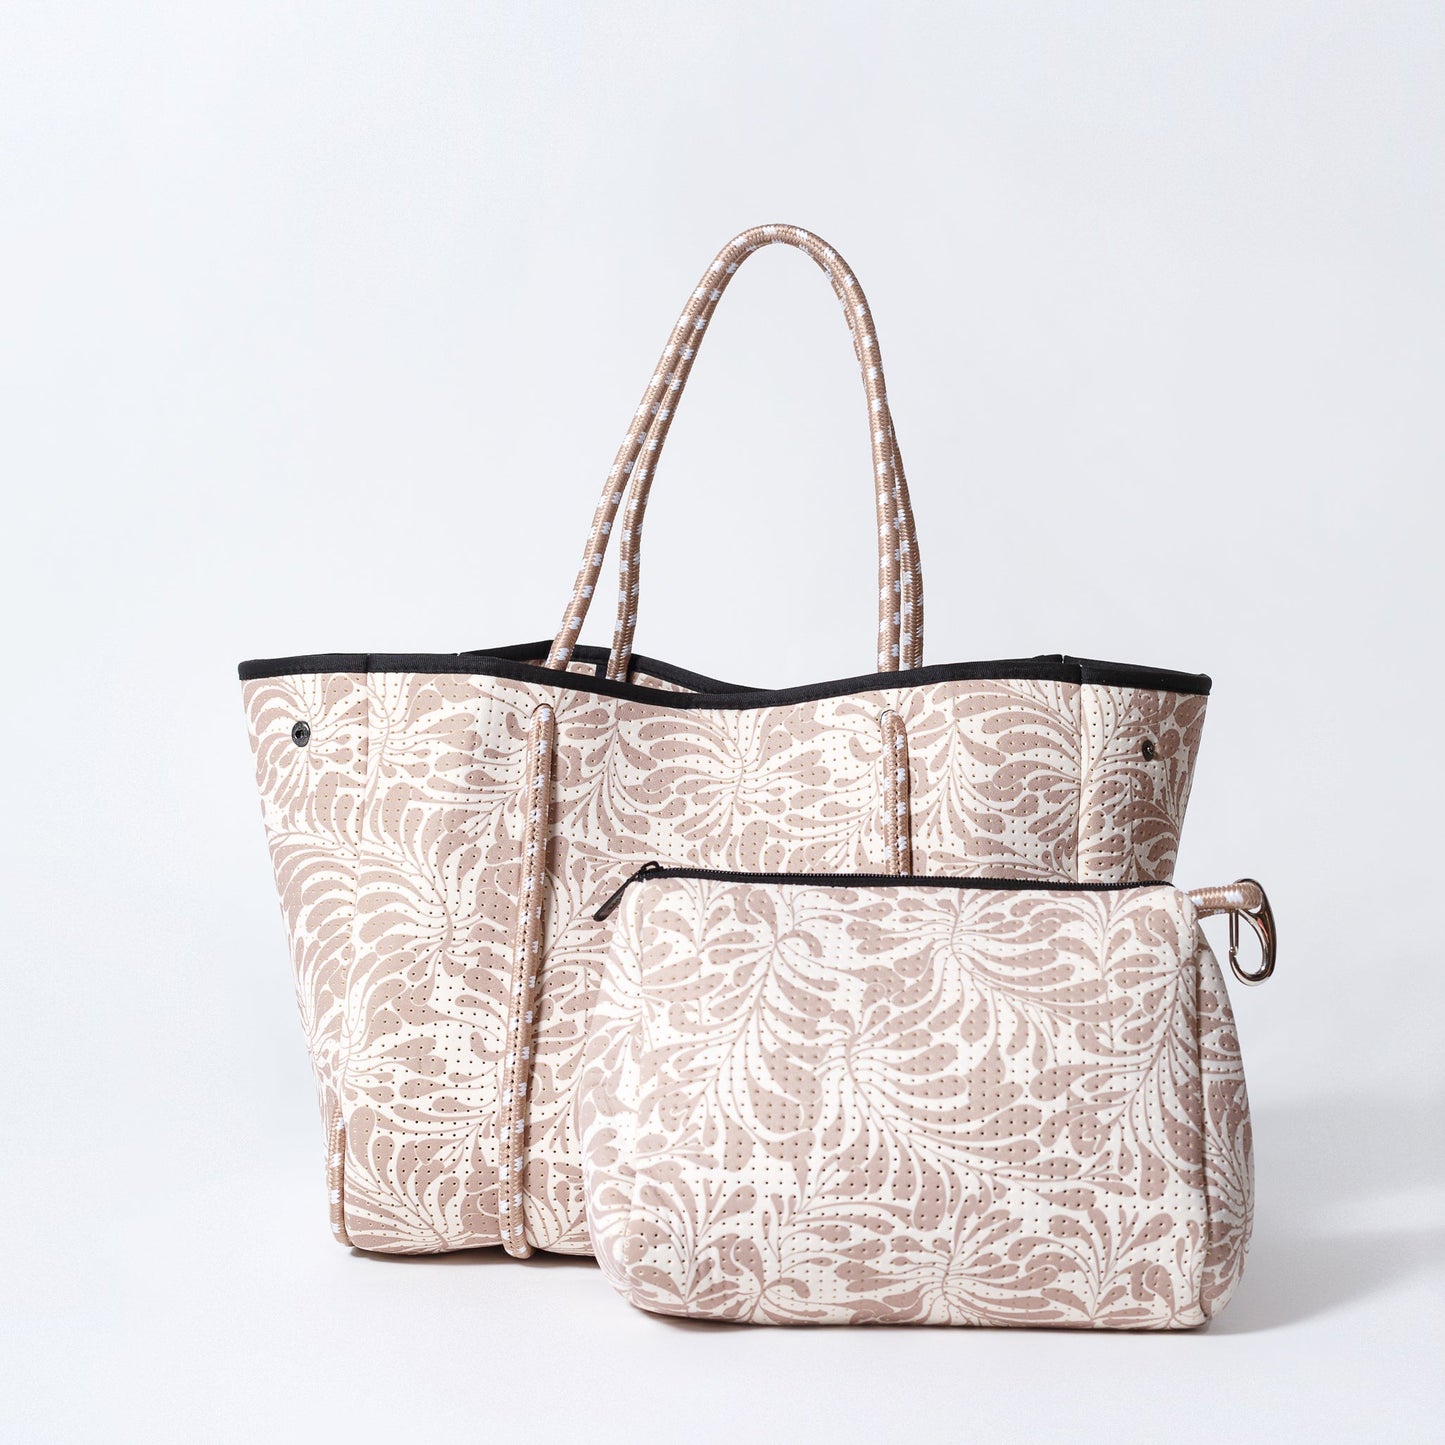 EVERYDAY TOTE PALM DREAMS BEIGE